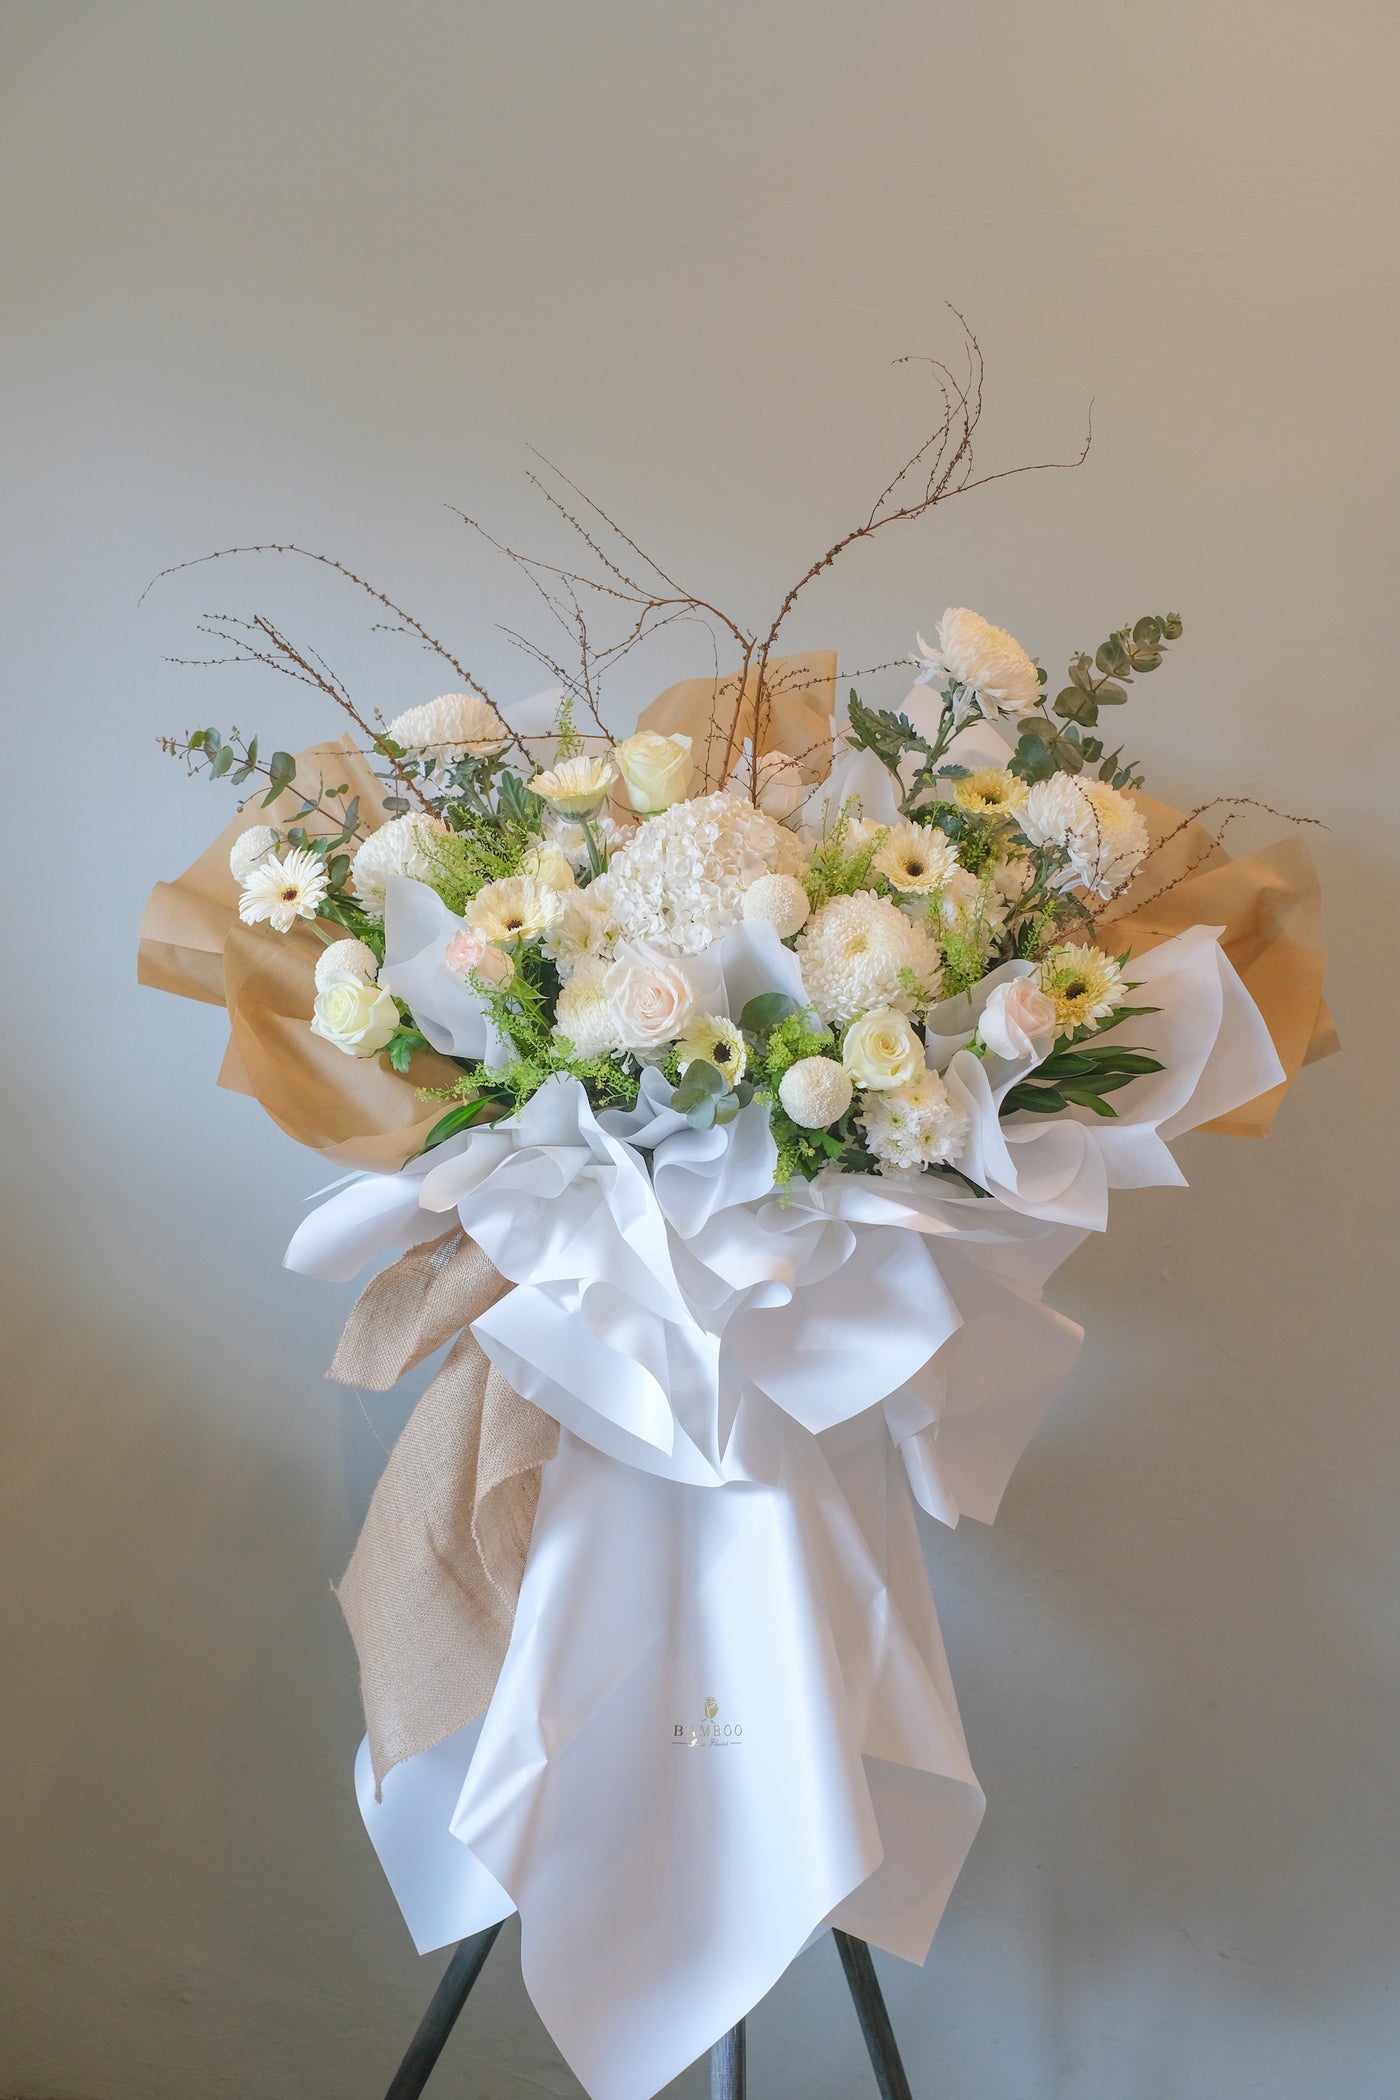 This condolence flowers stand is a beautiful mix of flowers that conveys sweet memories. For same day condolences flowers delivery in Penang.